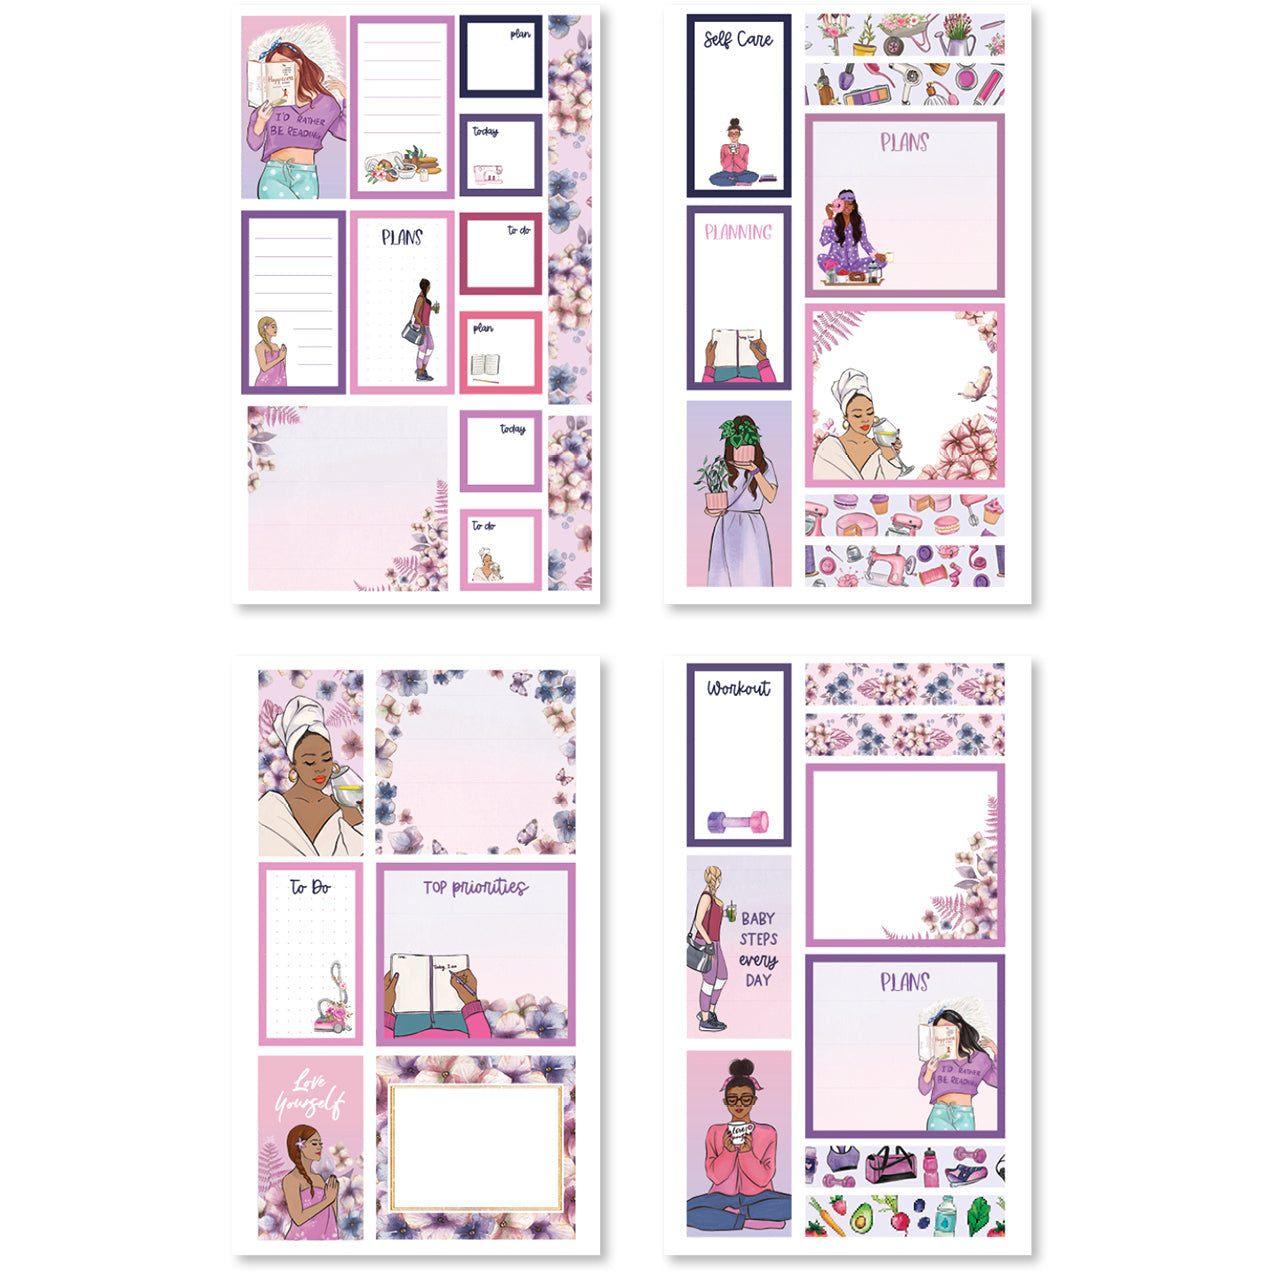 Tiny Sticker Pad - Rongrong - Boss Babe – The Happy Planner